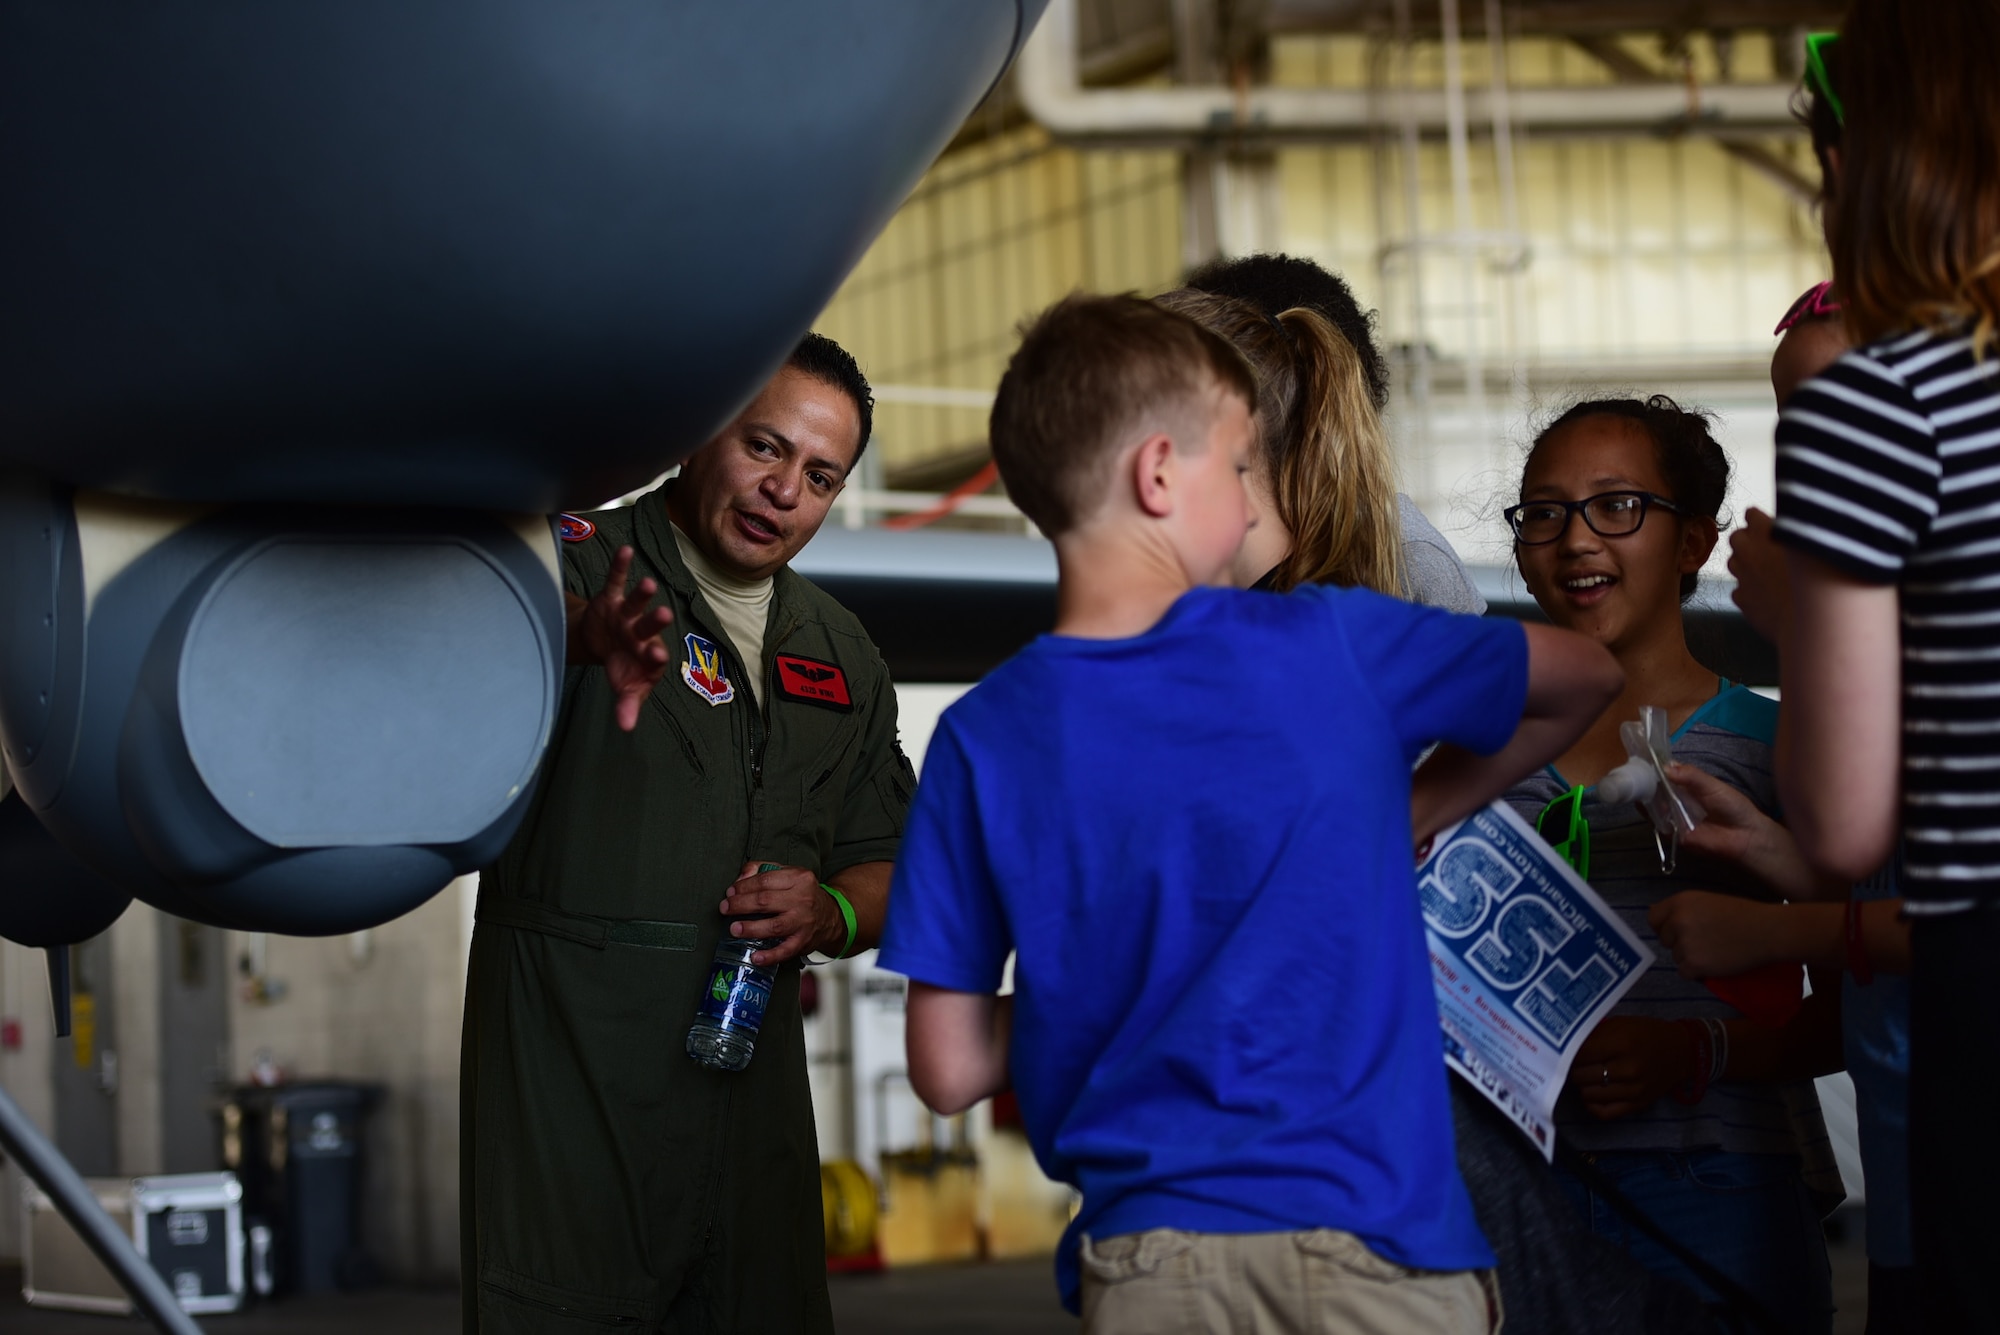 Tech. Sgt. Daniel, 489th Attack Squadron sensor operator, explains the capabilities of the Multi-Spectral Targeting System of an MQ-9 Reaper to spectators April 27, 2018, at the Joint Base Charleston Air & Space Expo at JB Charleston, S.C. More than 80,000 spectators were able to learn about the MQ-9 and how the Airmen who fly and maintain it deliver persistent attack and reconnaissance capabilities. (U.S. Air Force photo by Senior Airman Christian Clausen)